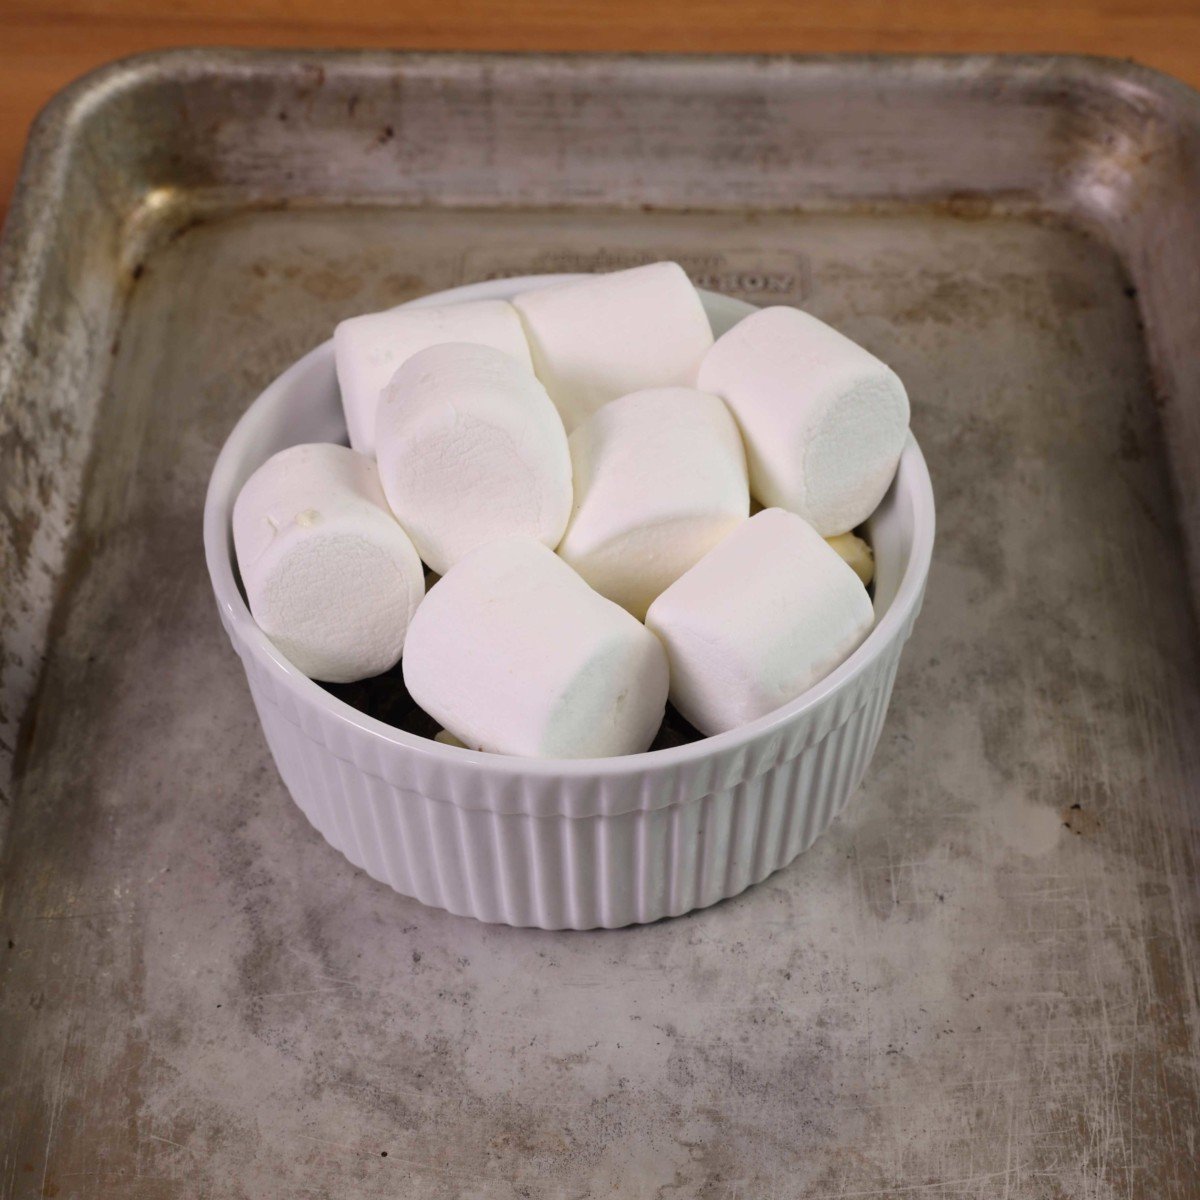 8 large marshmallows on top of chocolate chips in a white ramekin placed on top of a small baking sheet.